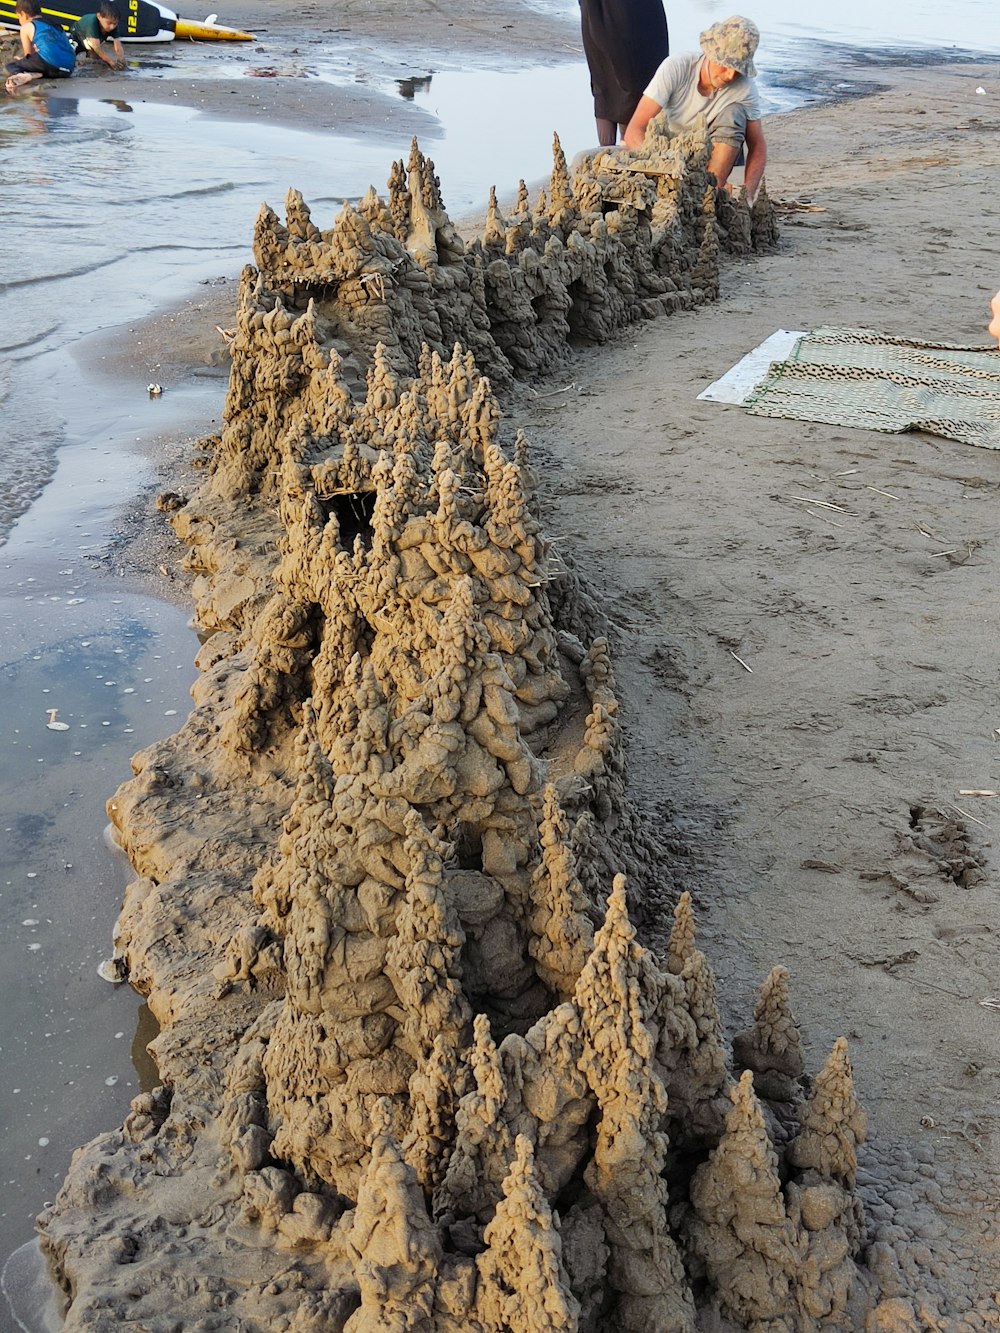 a sand castle on the beach with people in the background